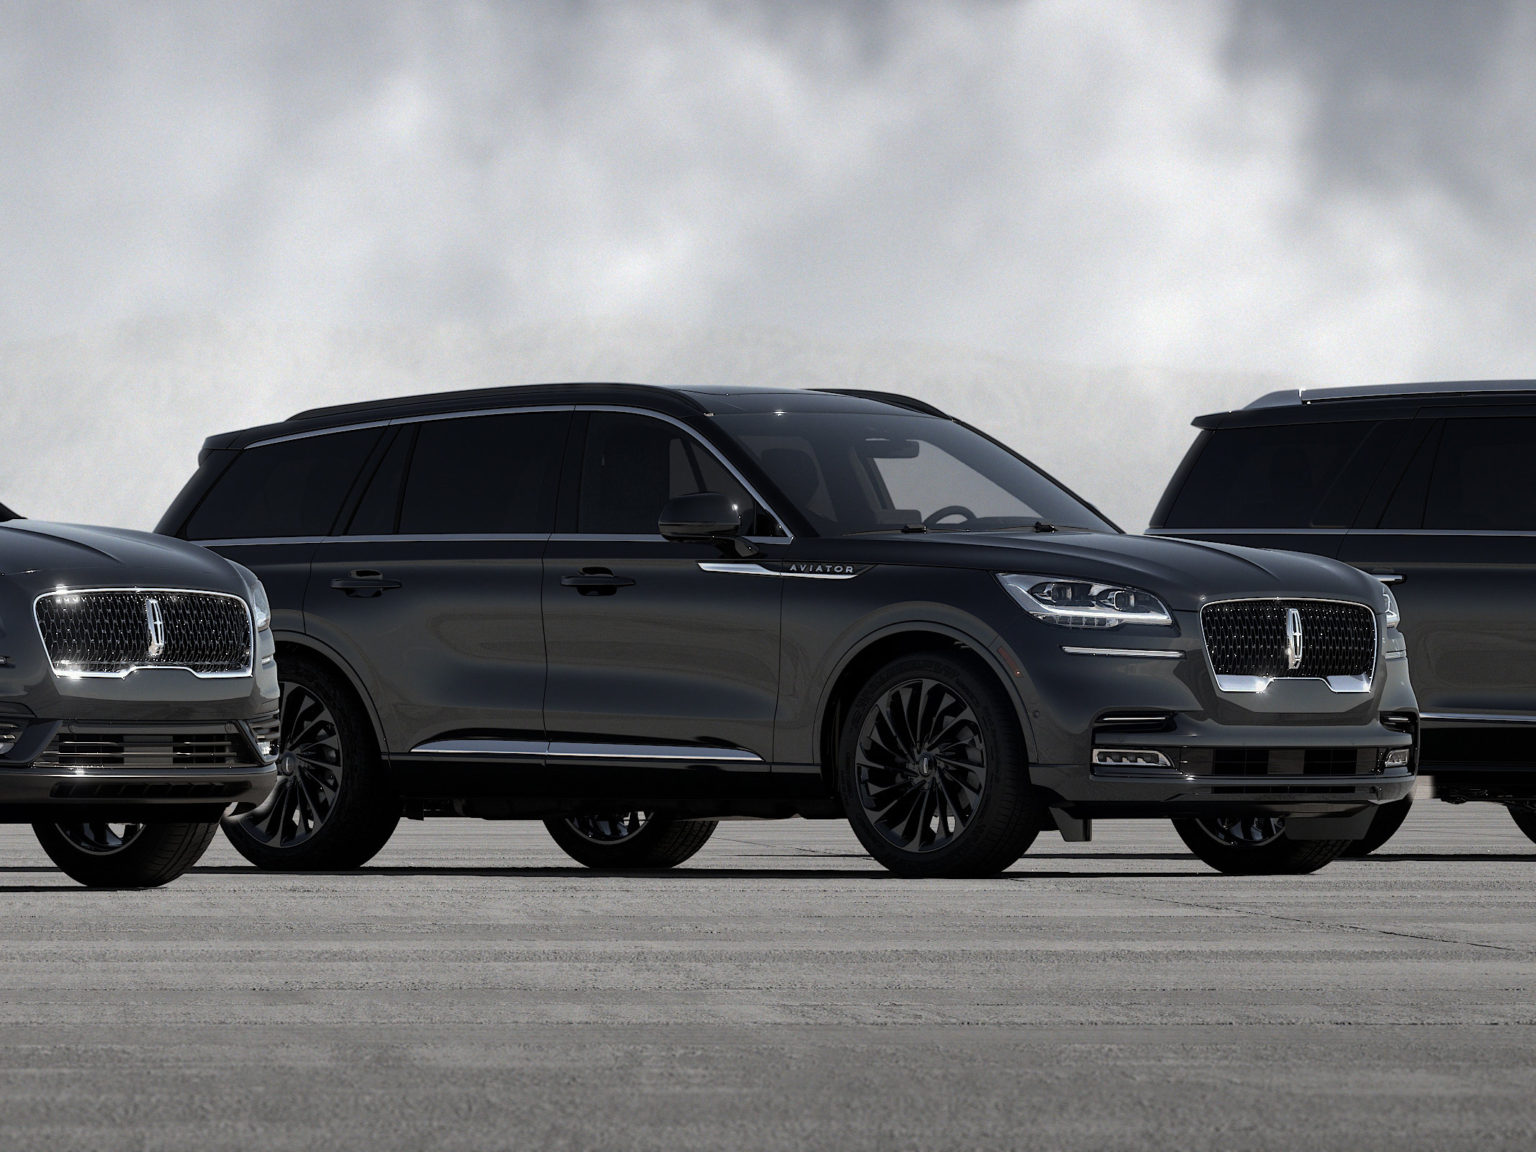 Lincoln's Monochromatic Package is now available on the Aviator and other SUVs.